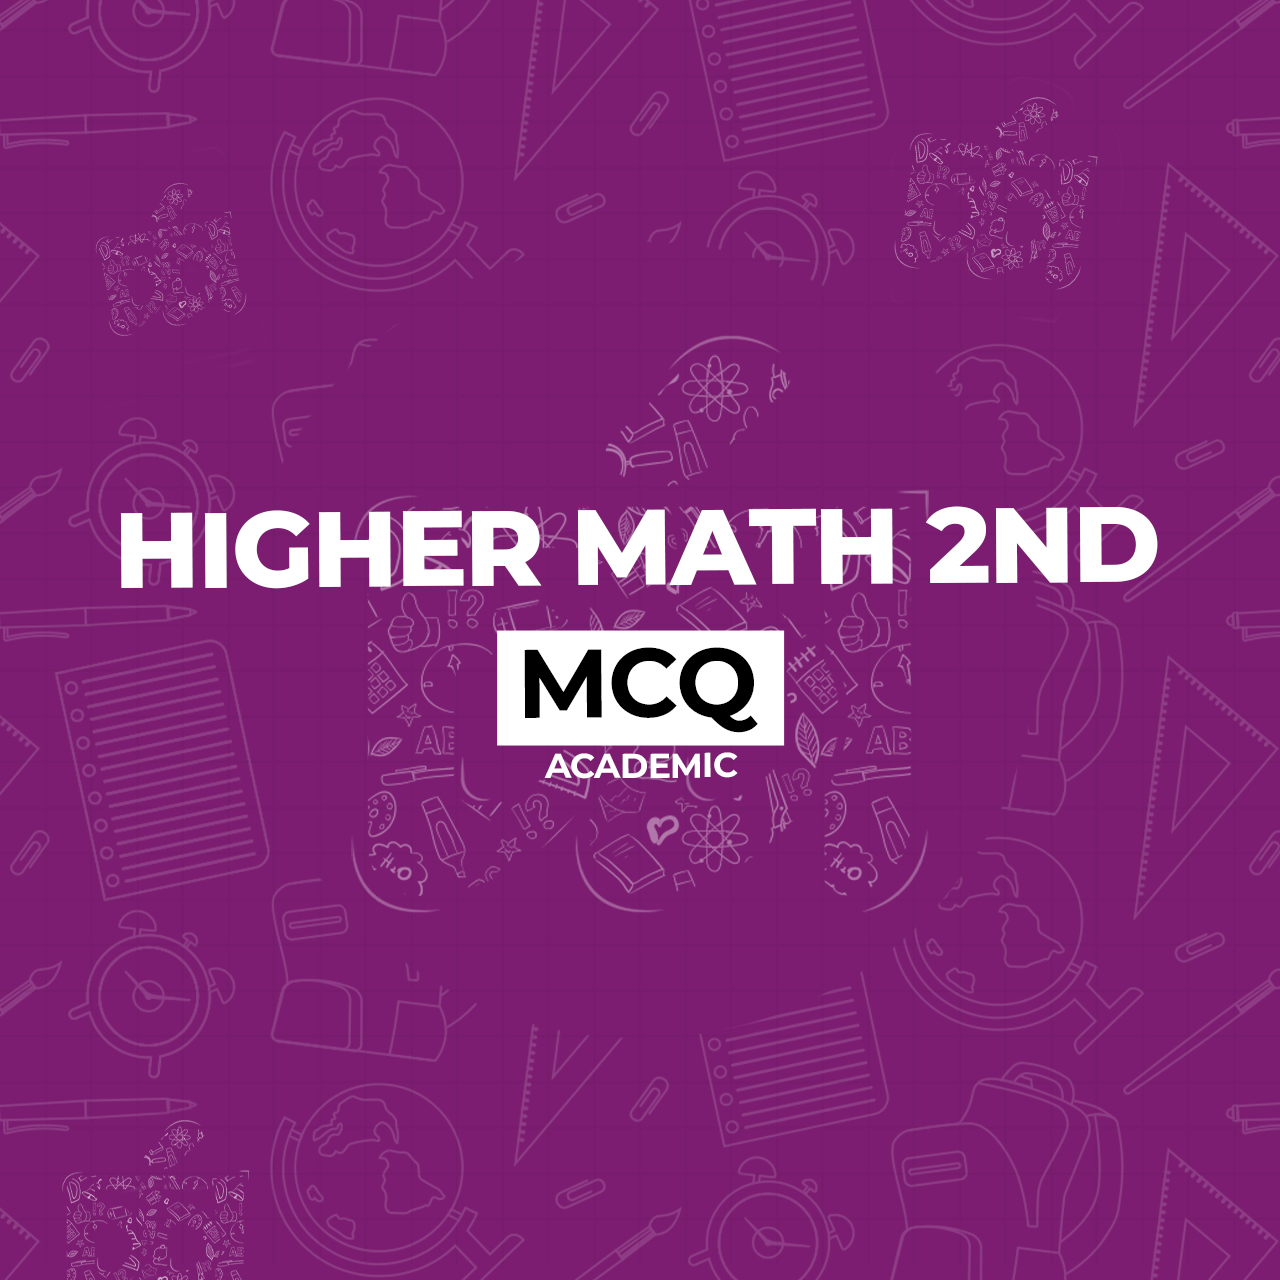 <p>HSC Higher Math 2nd Paper Digital Test Paper In this digital test paper, you will find all the board questions from the Higher Math 2nd Paper from 2017 to 2023 for all boards. Practice board MCQ questions now on Chorcha to secure A+ in HSC exam and stay ahead in admission</p>